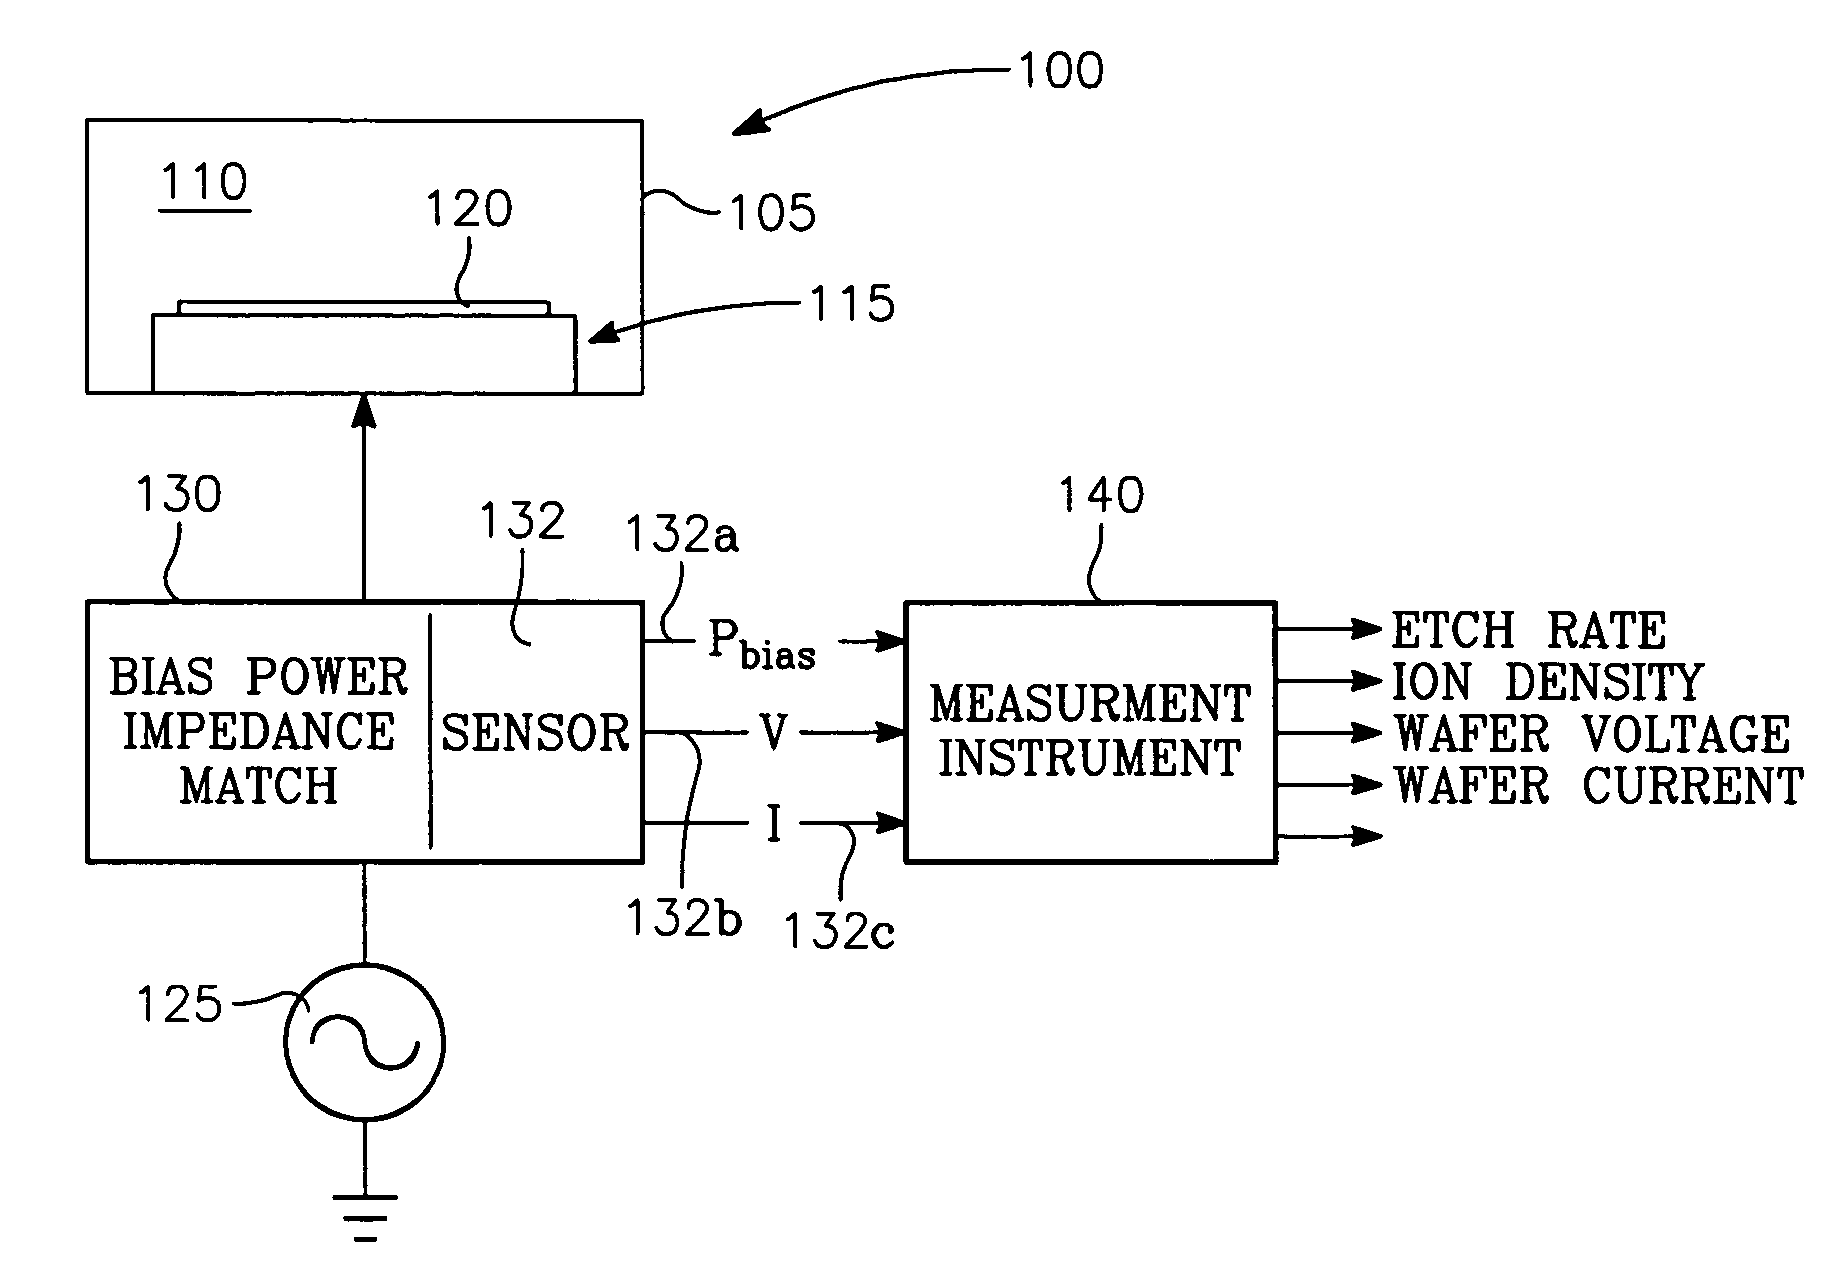 Method of operating a plasma reactor chamber with respect to two plasma parameters selected from a group comprising ion density, wafer voltage, etch rate and wafer current, by controlling chamber parameters of source power and bias power